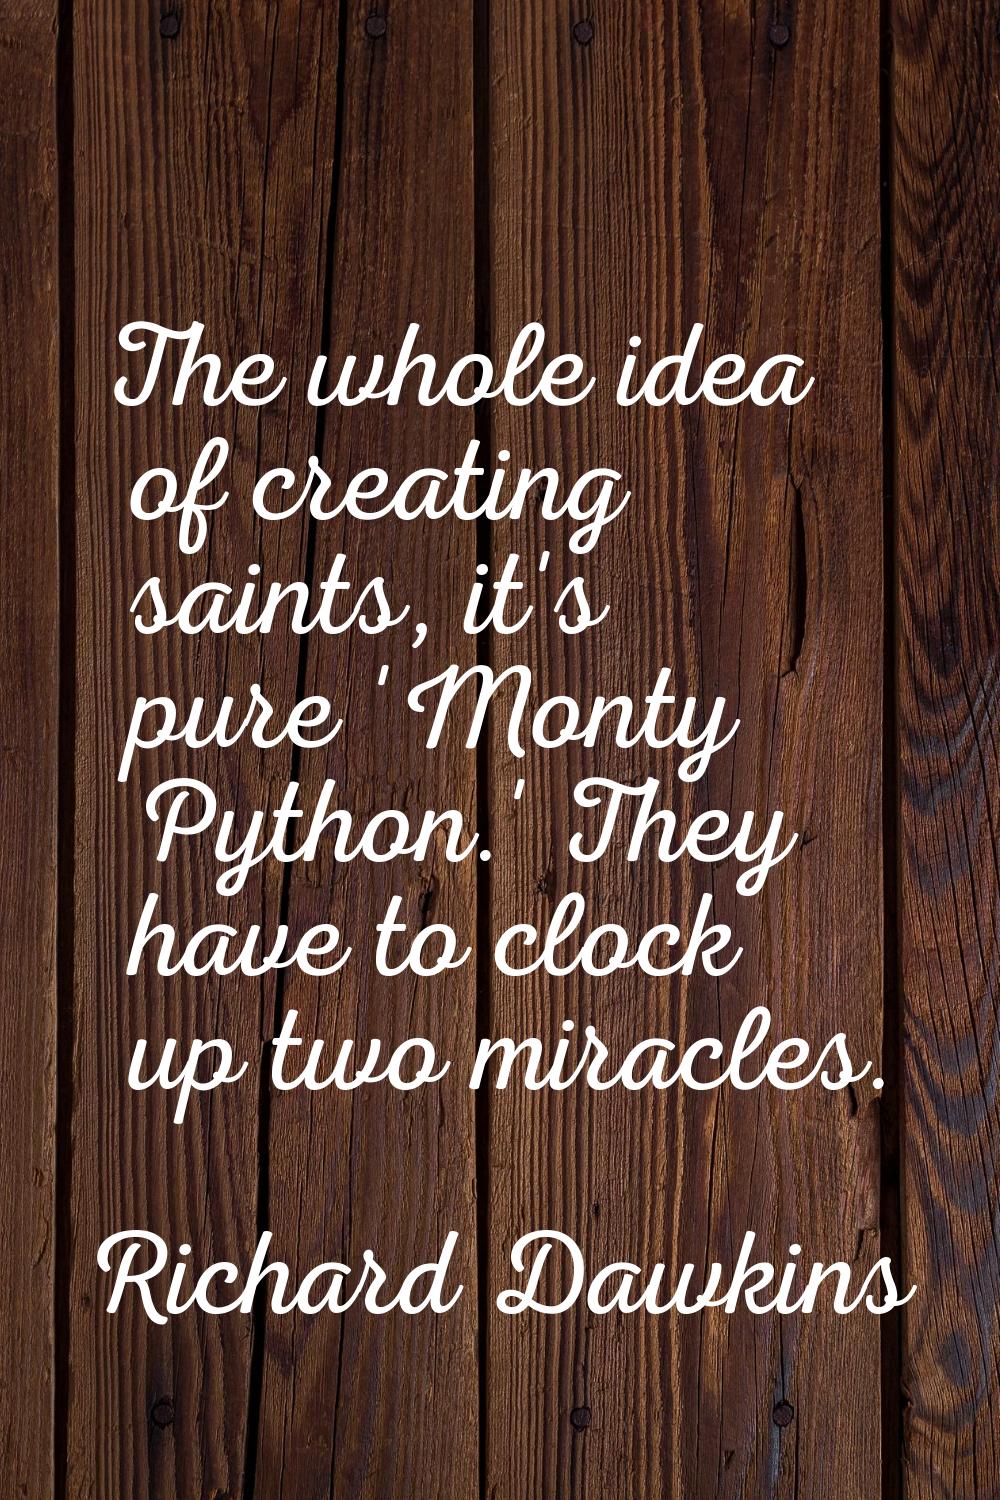 The whole idea of creating saints, it's pure 'Monty Python.' They have to clock up two miracles.